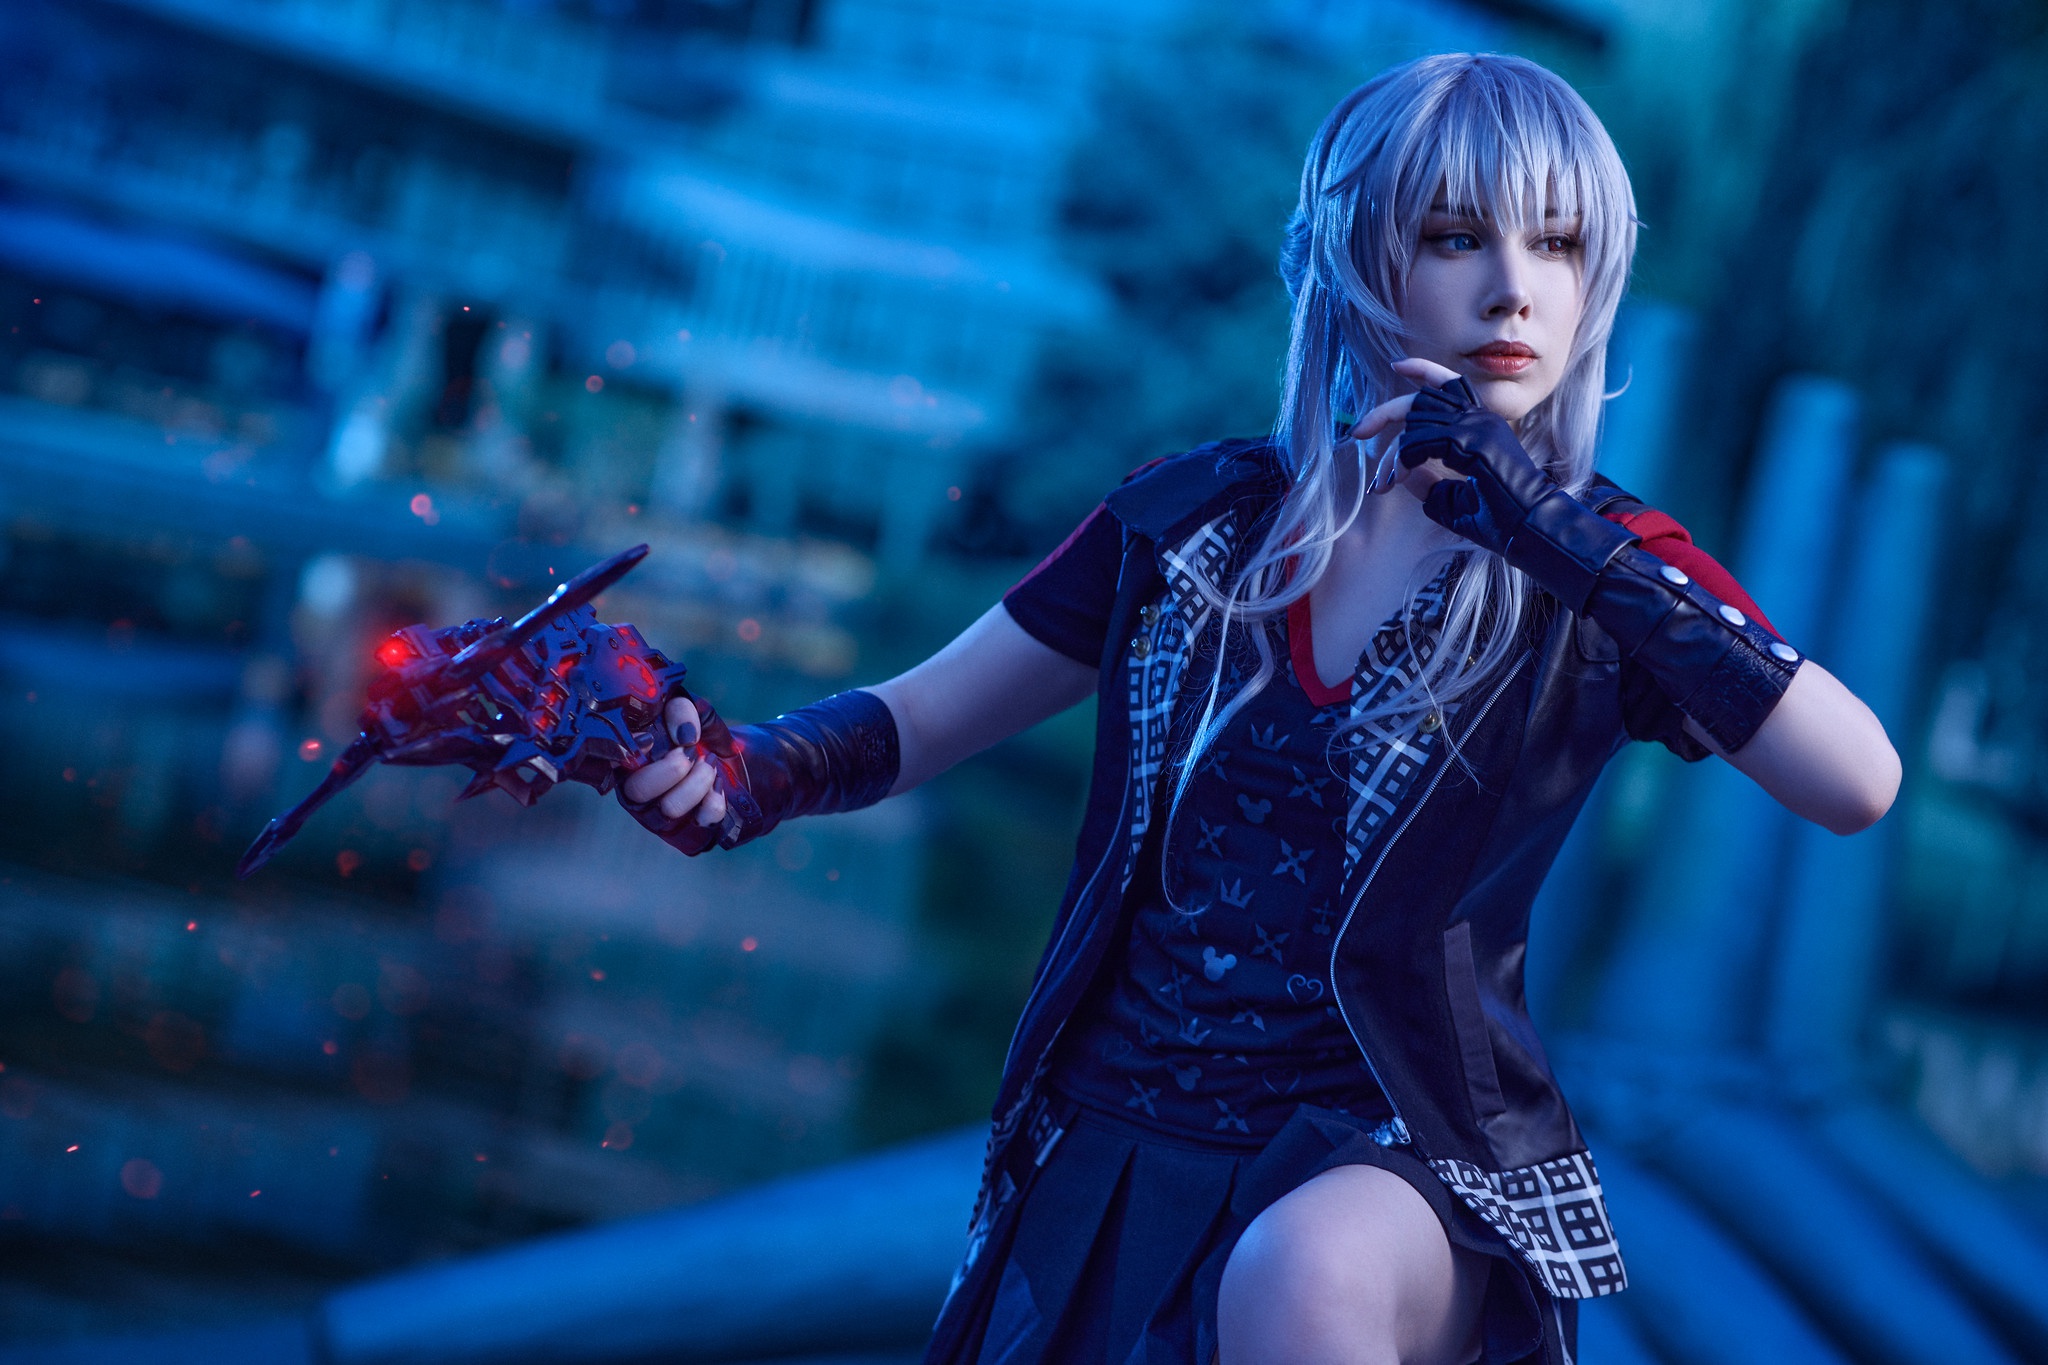 Cosplay Kingdom Hearts 3 Women Model Video Games Video Game Girls Video Game Characters 2048x1365